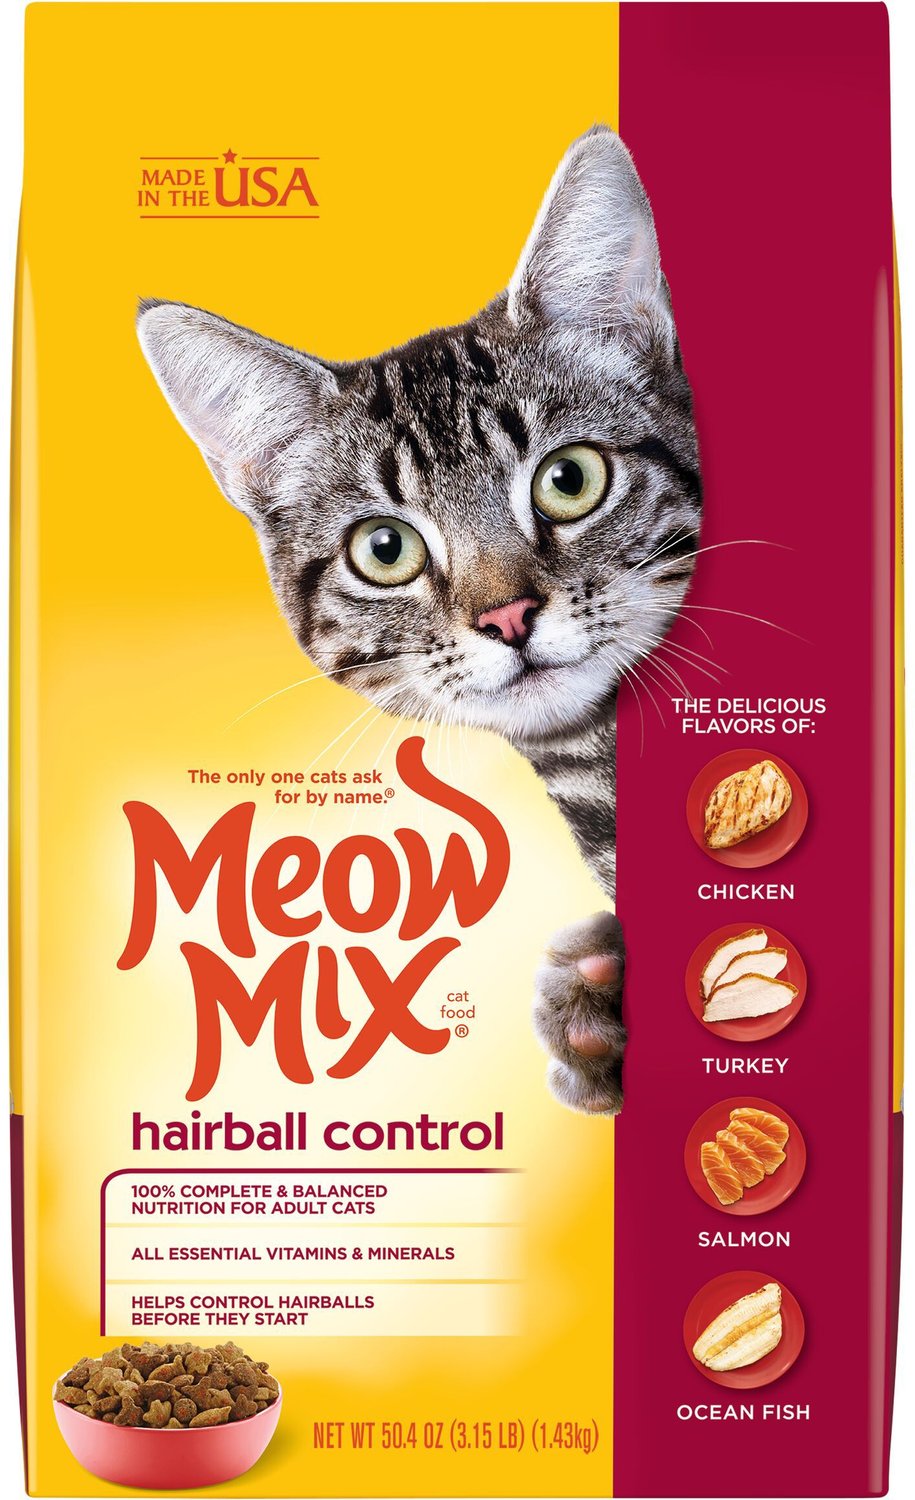 MEOW MIX Hairball Control Dry Cat Food, 3.15lb bag